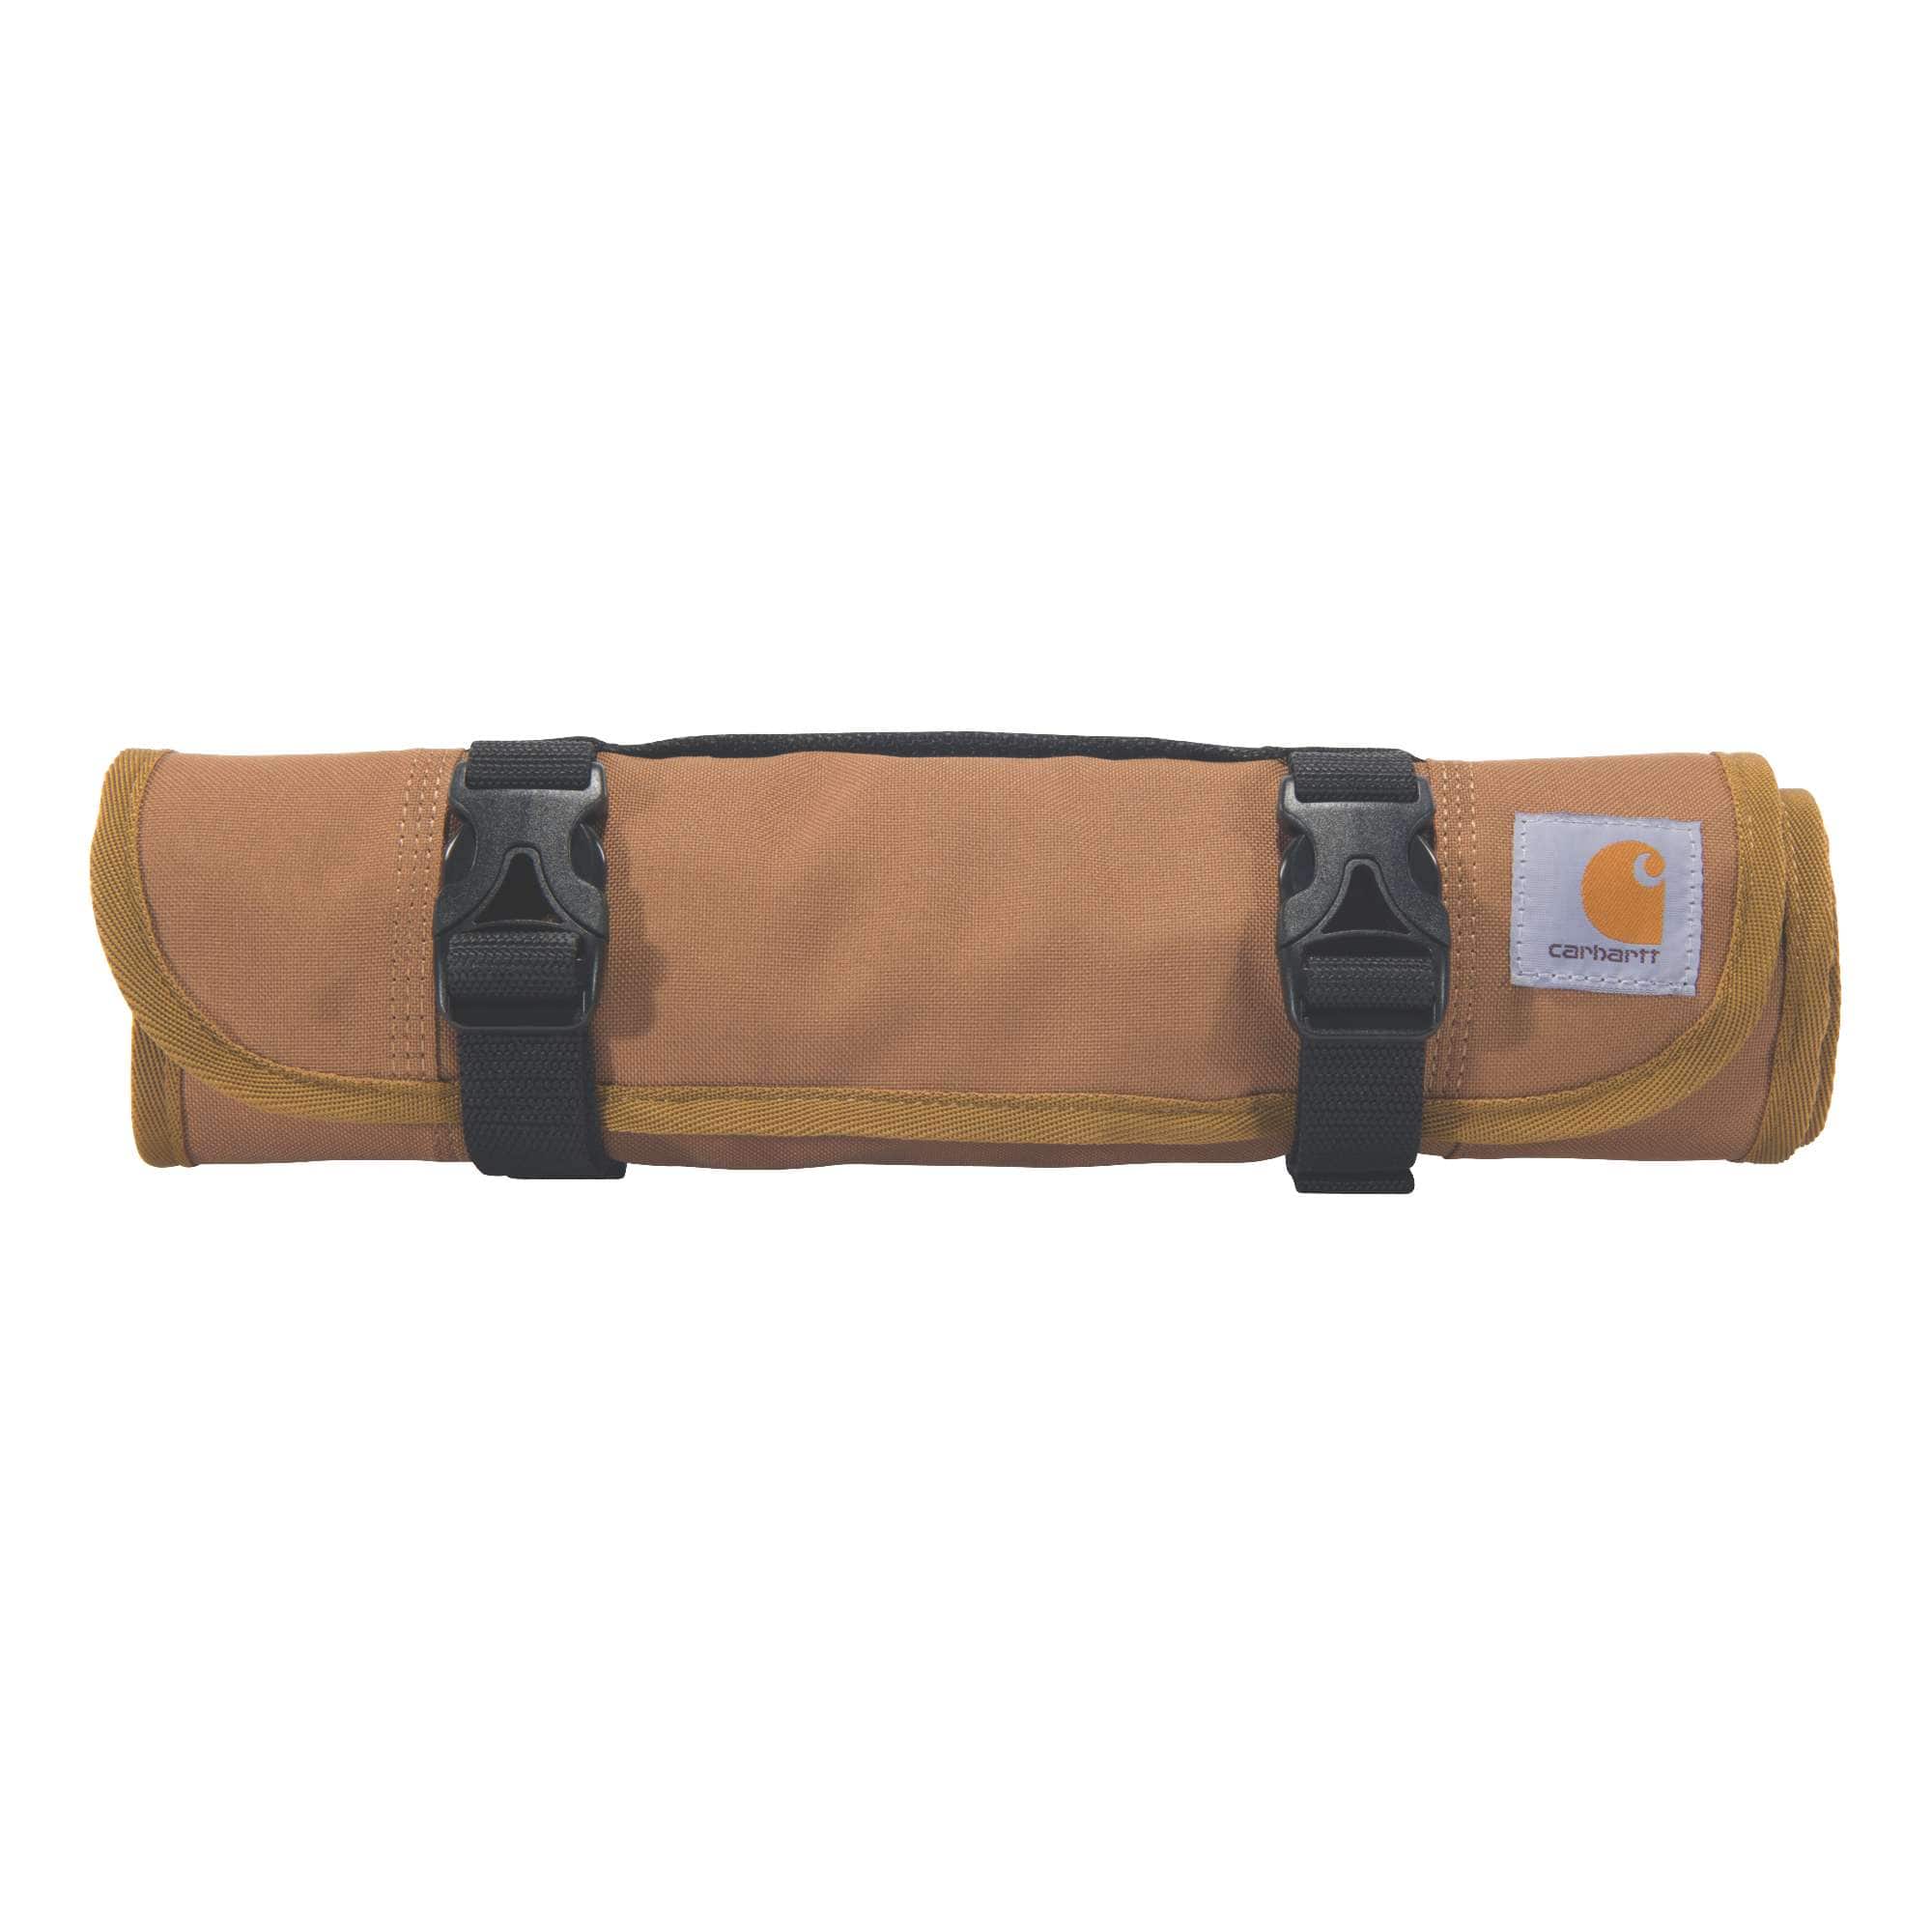 18-Pocket Utility Roll | Father's Day Gifts Under $25 | Carhartt